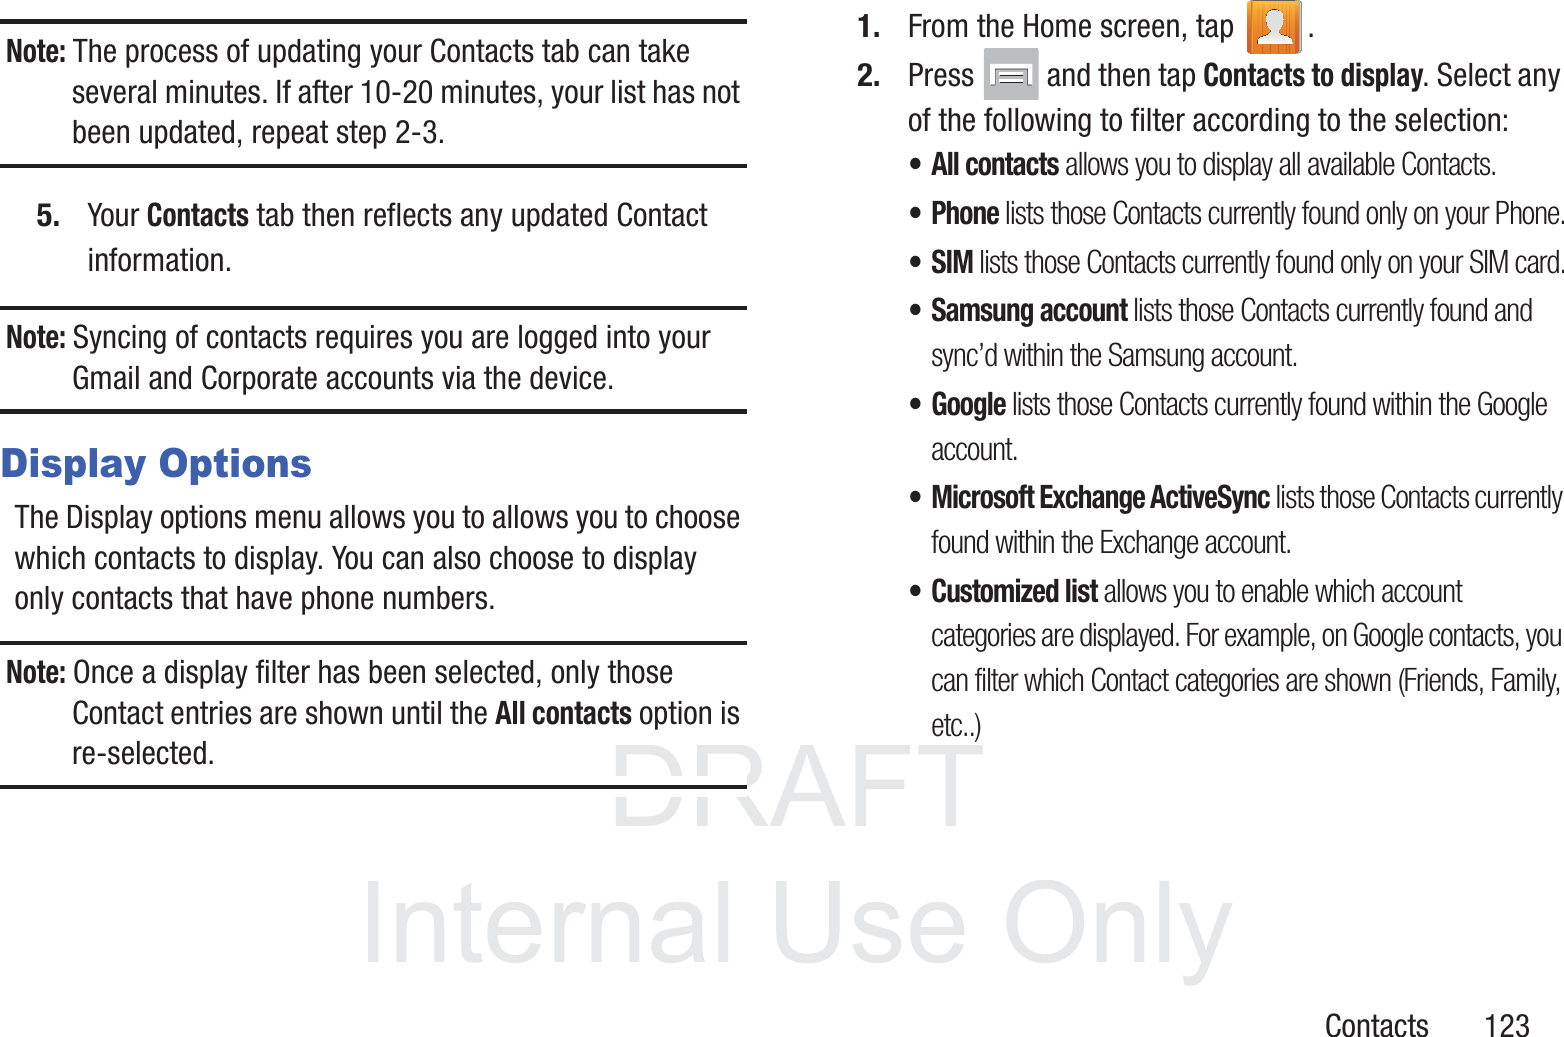 DRAFT InternalUse OnlyContacts       123Note: The process of updating your Contacts tab can take several minutes. If after 10-20 minutes, your list has not been updated, repeat step 2-3.5. Your Contacts tab then reflects any updated Contact information.Note: Syncing of contacts requires you are logged into your Gmail and Corporate accounts via the device.Display OptionsThe Display options menu allows you to allows you to choose which contacts to display. You can also choose to display only contacts that have phone numbers.Note: Once a display filter has been selected, only those Contact entries are shown until the All contacts option is re-selected.1. From the Home screen, tap  .2. Press   and then tap Contacts to display. Select any of the following to filter according to the selection:• All contacts allows you to display all available Contacts.• Phone lists those Contacts currently found only on your Phone.•SIM lists those Contacts currently found only on your SIM card.• Samsung account lists those Contacts currently found and sync’d within the Samsung account.• Google lists those Contacts currently found within the Google account.• Microsoft Exchange ActiveSync lists those Contacts currently found within the Exchange account.• Customized list allows you to enable which account categories are displayed. For example, on Google contacts, you can filter which Contact categories are shown (Friends, Family, etc..)